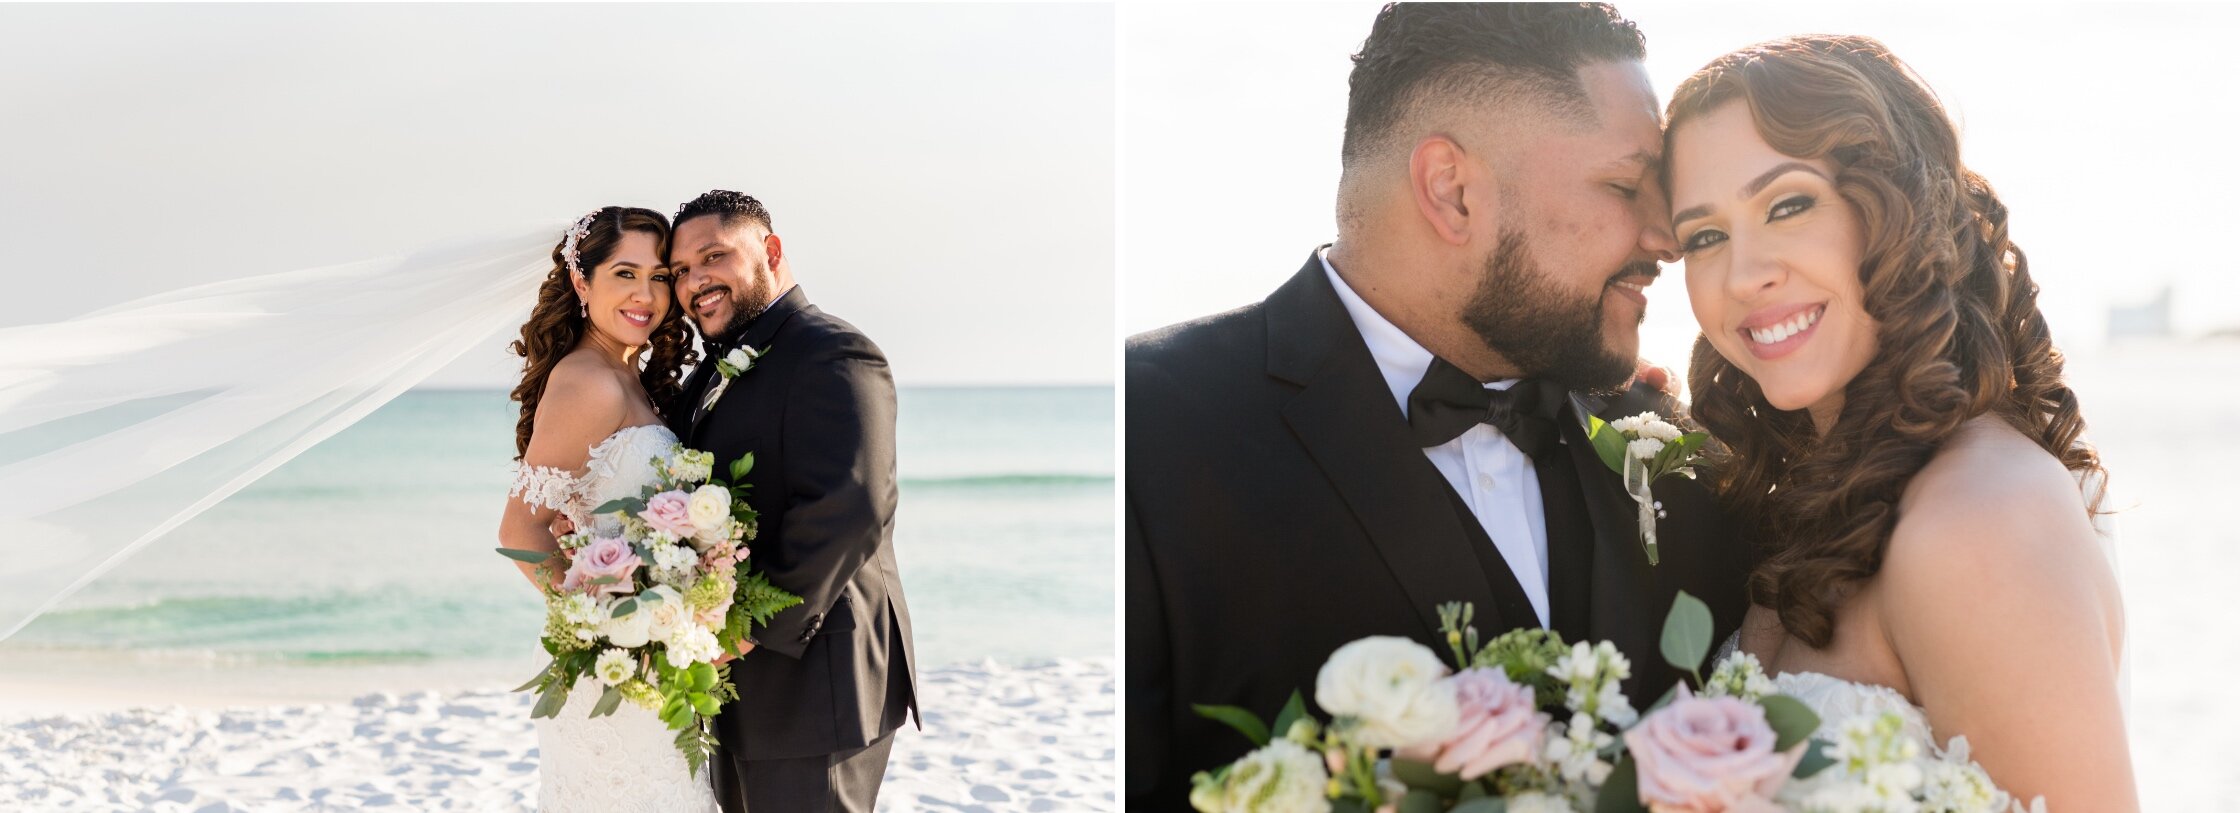 Pensacola Beach Wedding Photography of Bride and Groom on the beach at a beach condo photographed by Kristen Marcus Photography